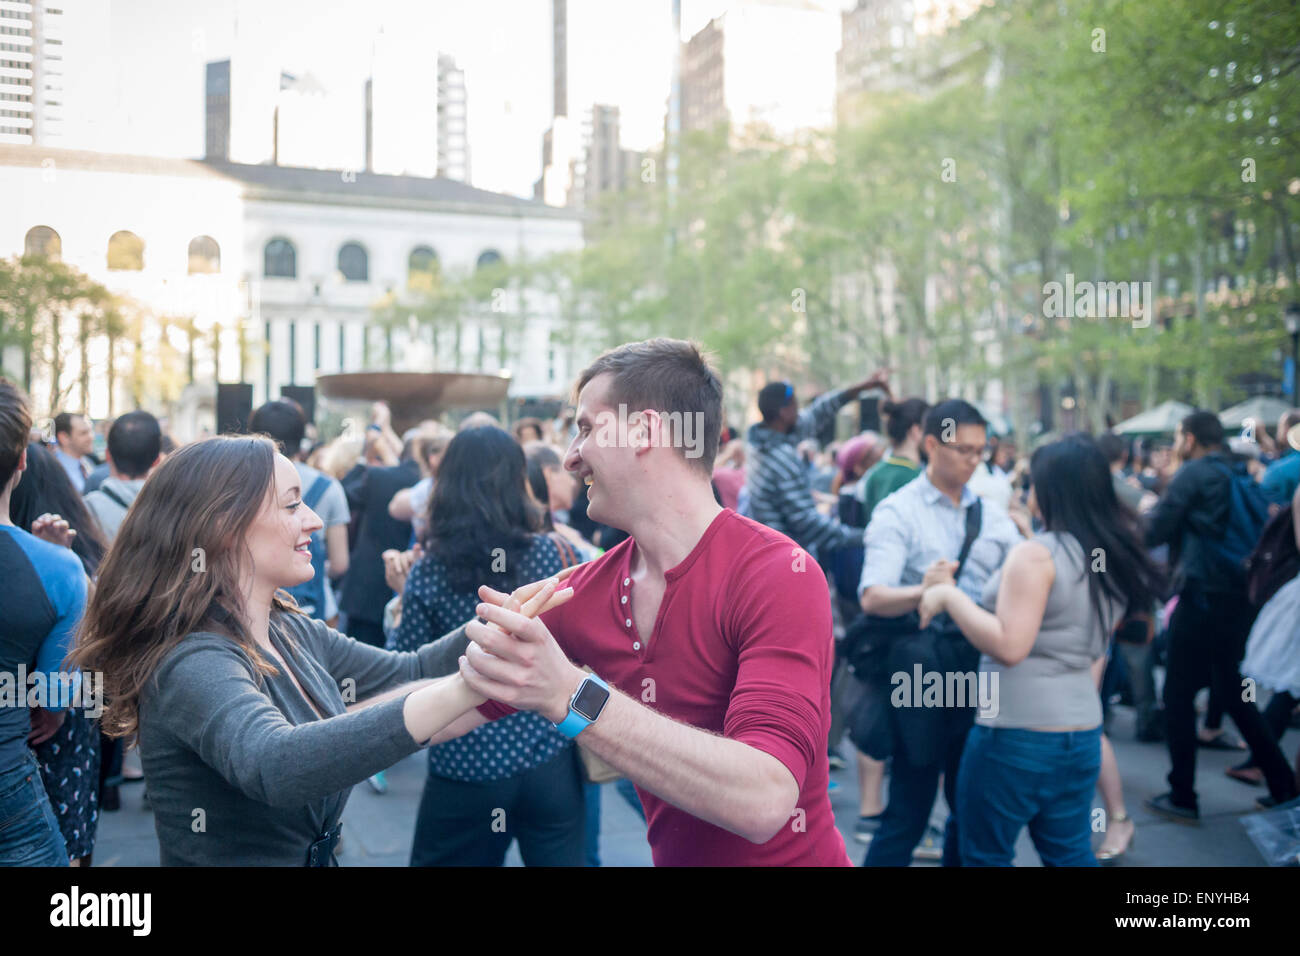 Hundreds channel their inner Fred Astaire and Ginger Rogers as they waltz the night away on the opening night of Dancing in Bryant Park, with a Waltz Ball, in New York on Wednesday, May 6, 2015. Everyone from beginners to amateur competitors participated in the weekly event, featuring a different style of dance each week. Live music and instruction complimented the popular event. (© Richard B. Levine) Stock Photo